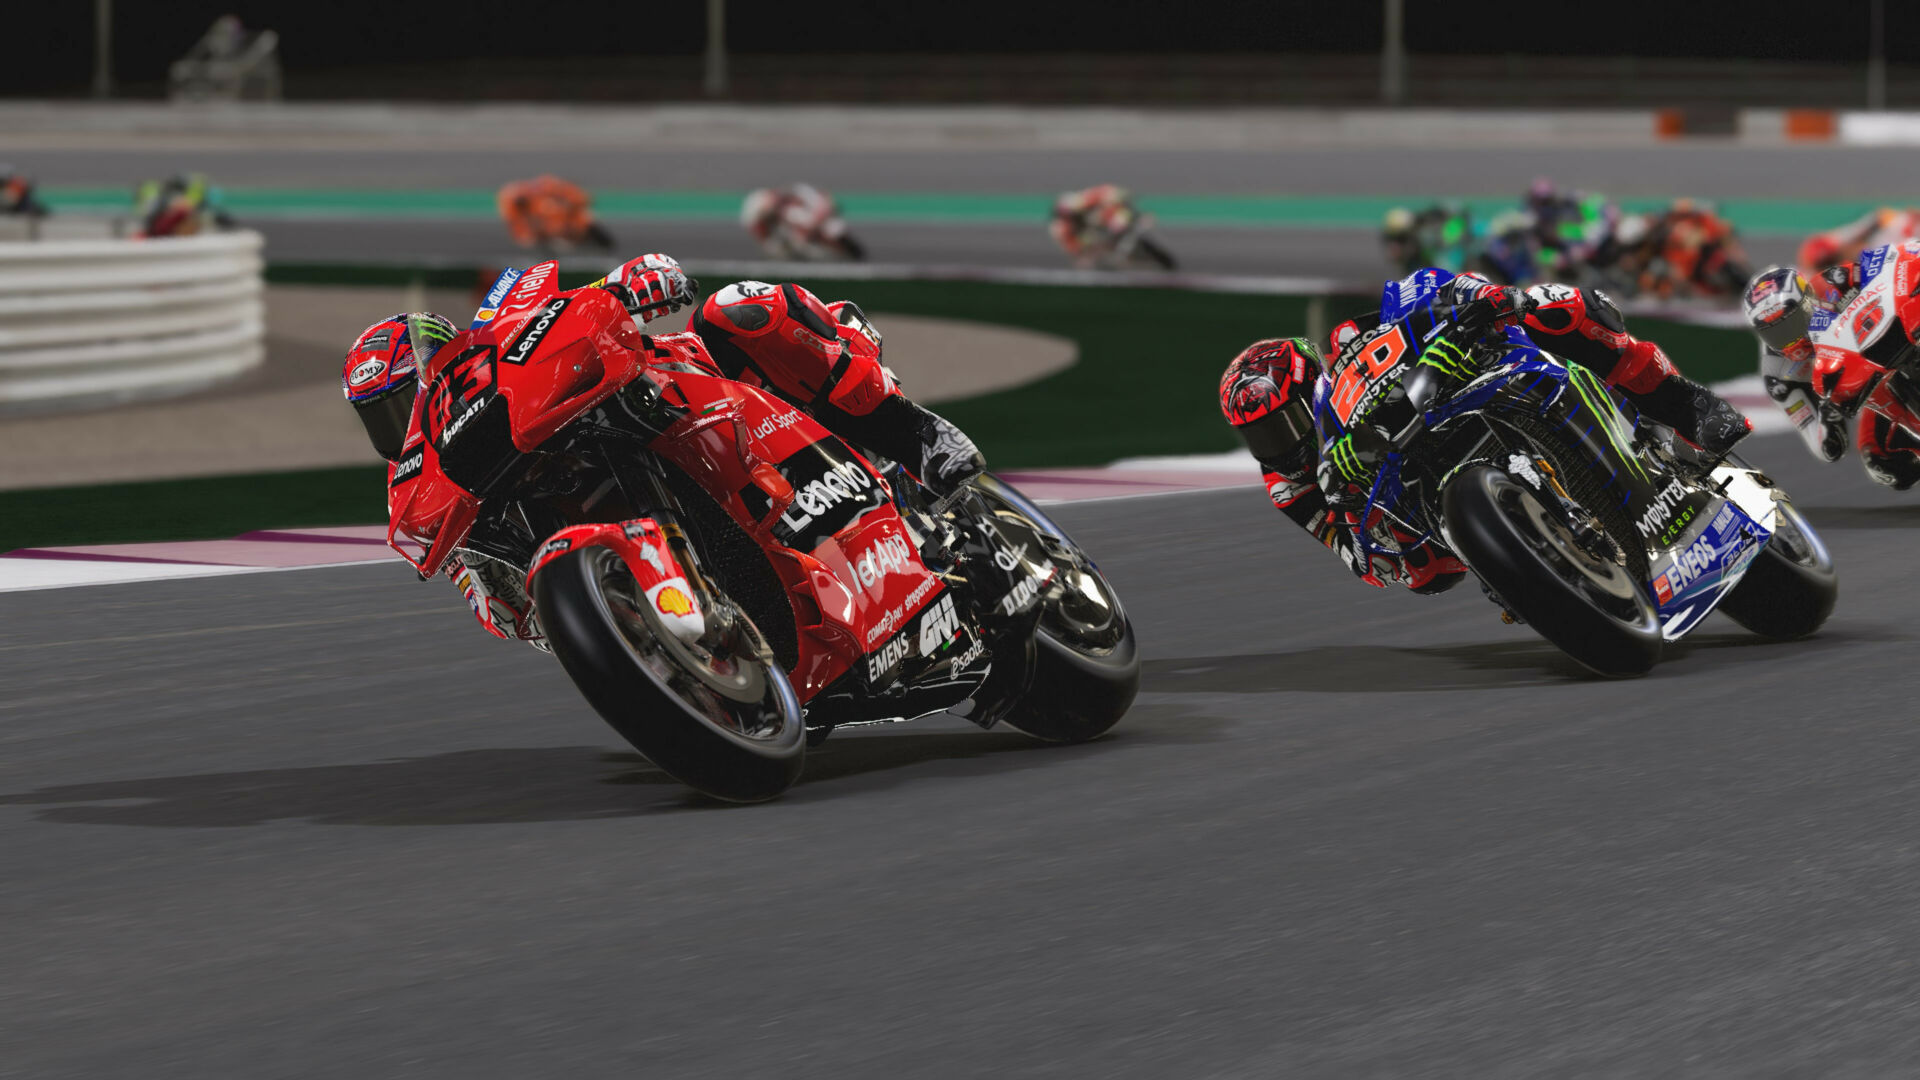 MotoGP 22 Video Game Is Now Available